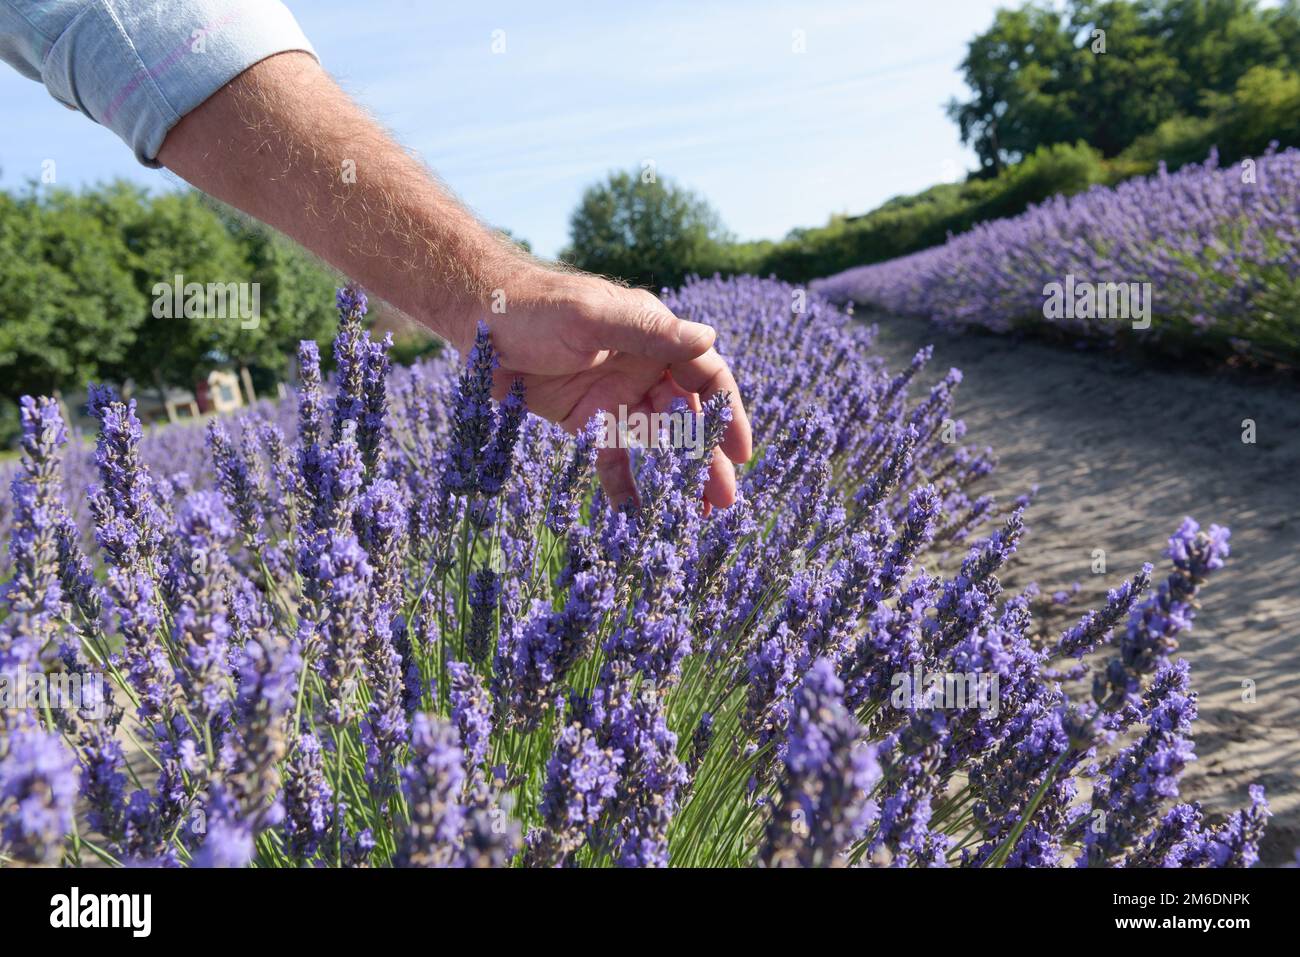 Blooming lavender. Farmers hand touching tops of purple bushes in blossom. Aromatic plants farm landscape in sunny day. Blue sky background. Stock Photo